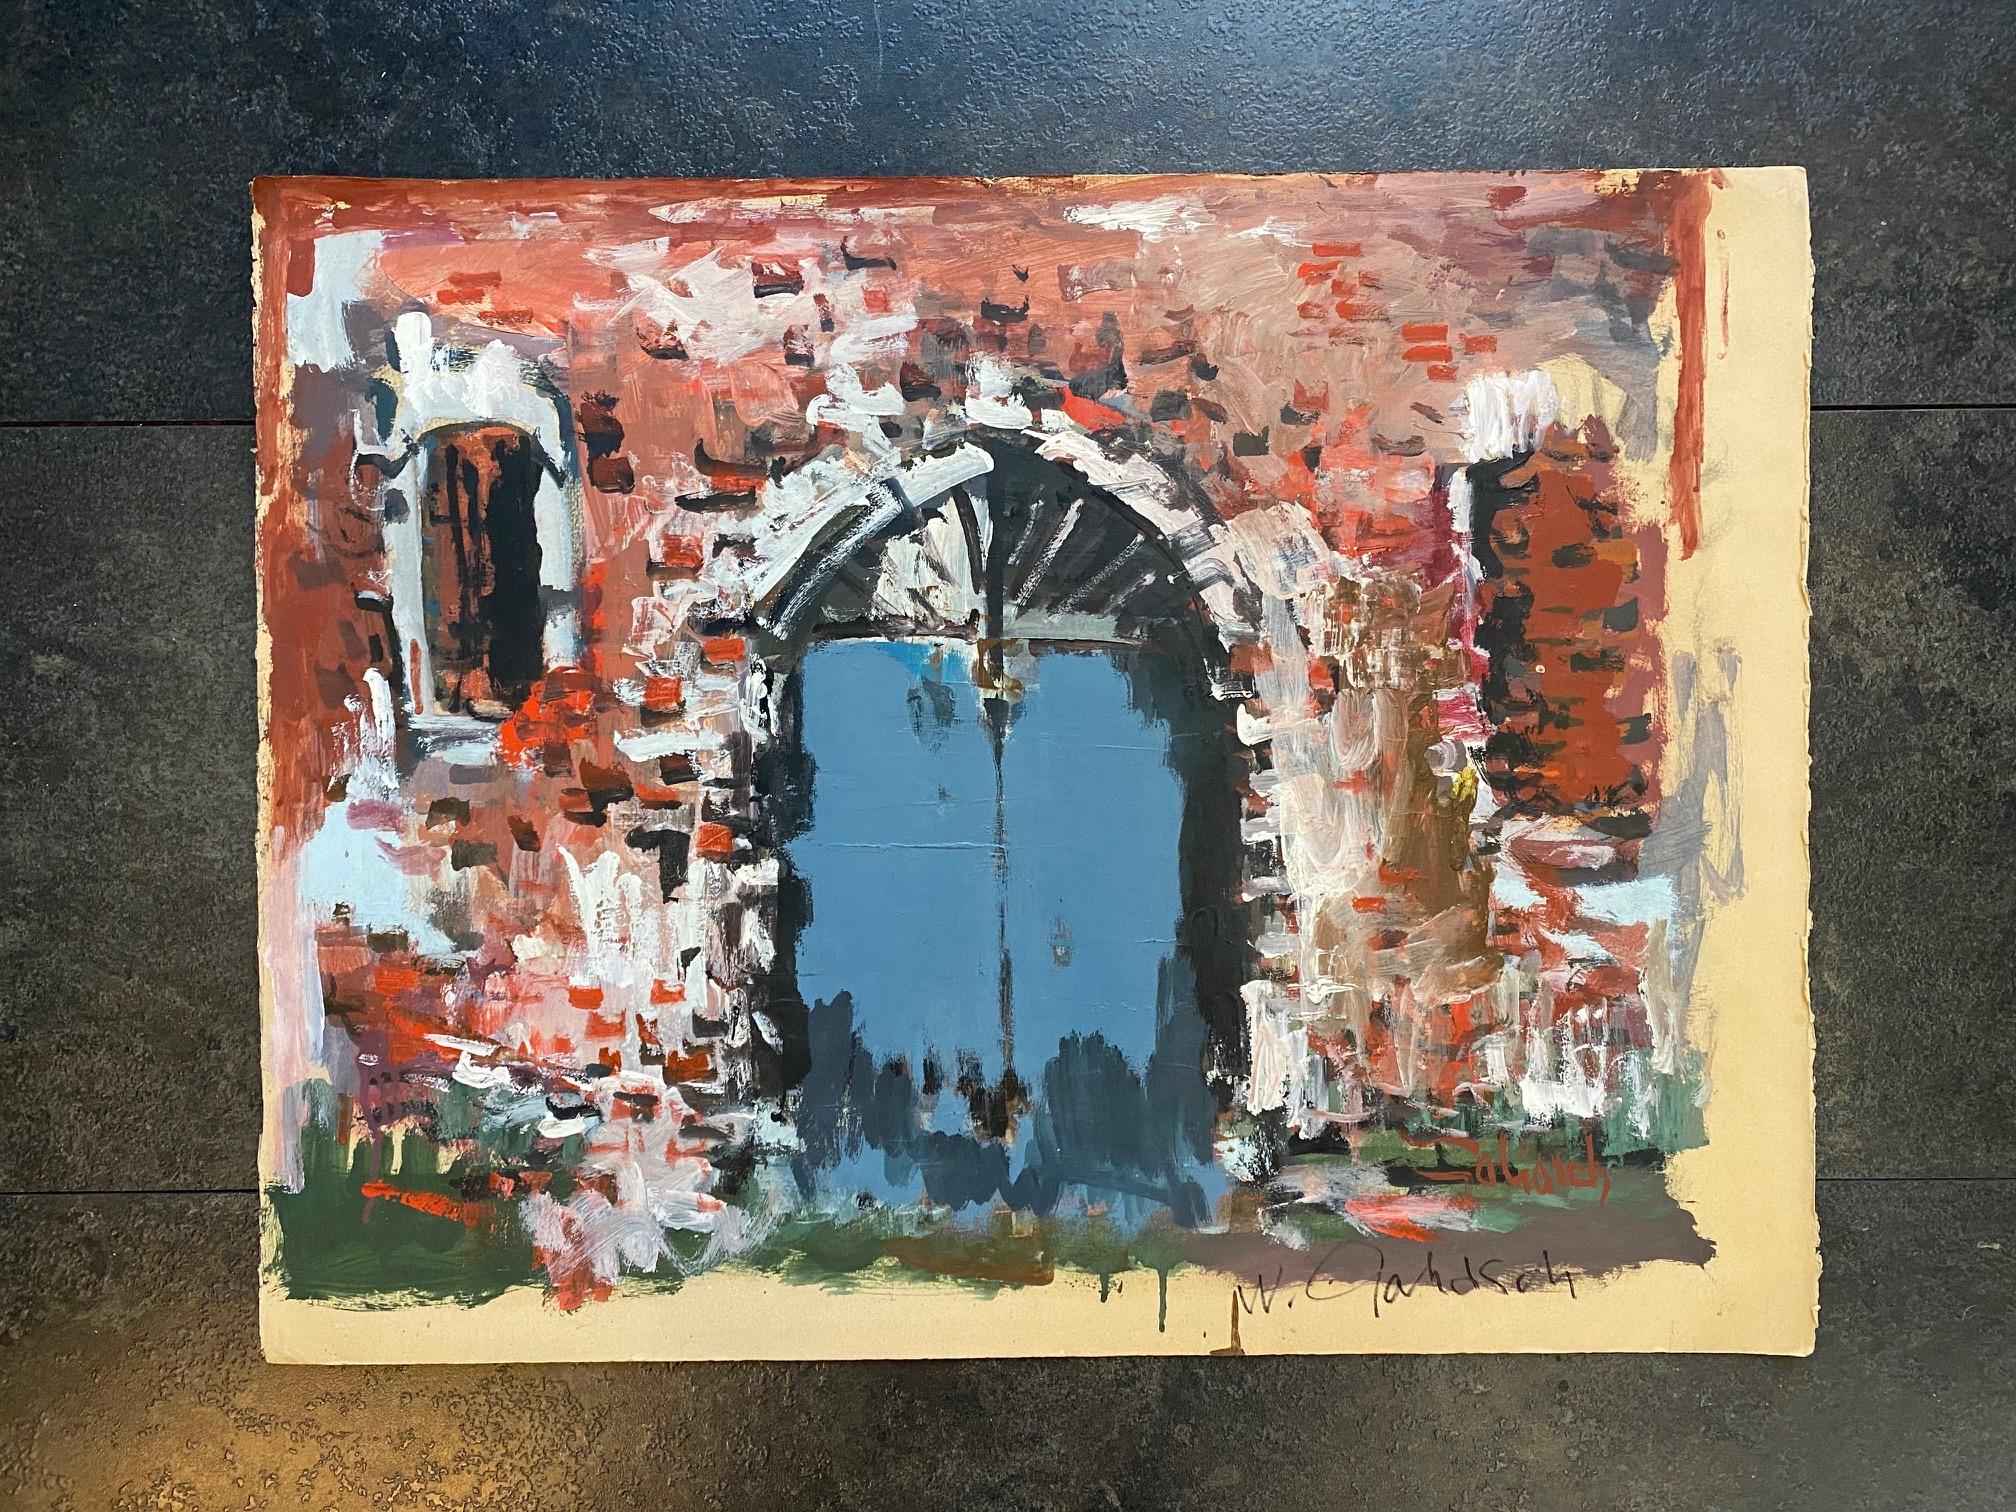 The blue door by William GOLIASCH - Gouache on paper 50x65 cm - Painting by William Goliasch